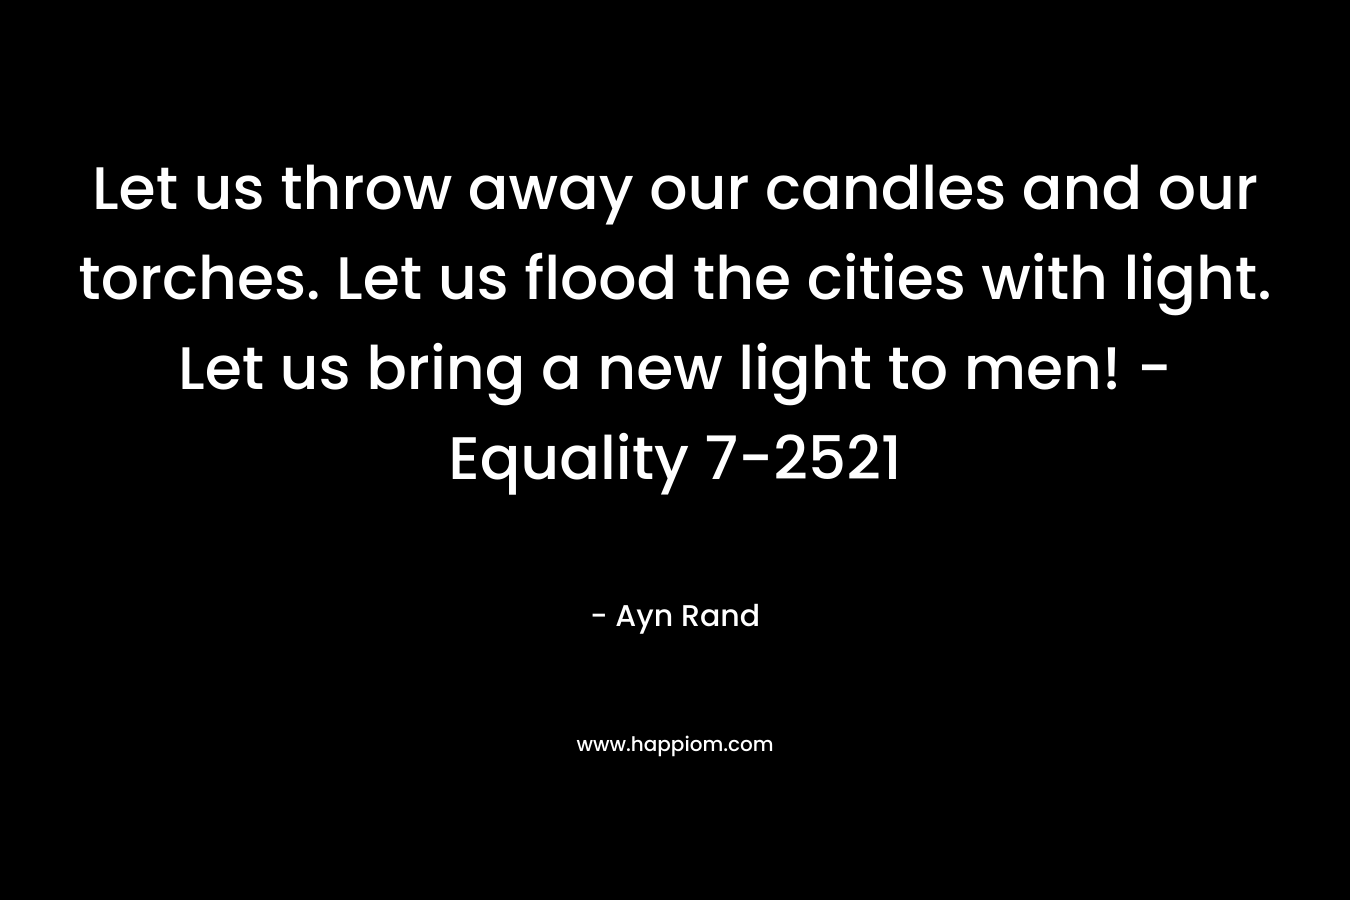 Let us throw away our candles and our torches. Let us flood the cities with light. Let us bring a new light to men! -Equality 7-2521 – Ayn Rand